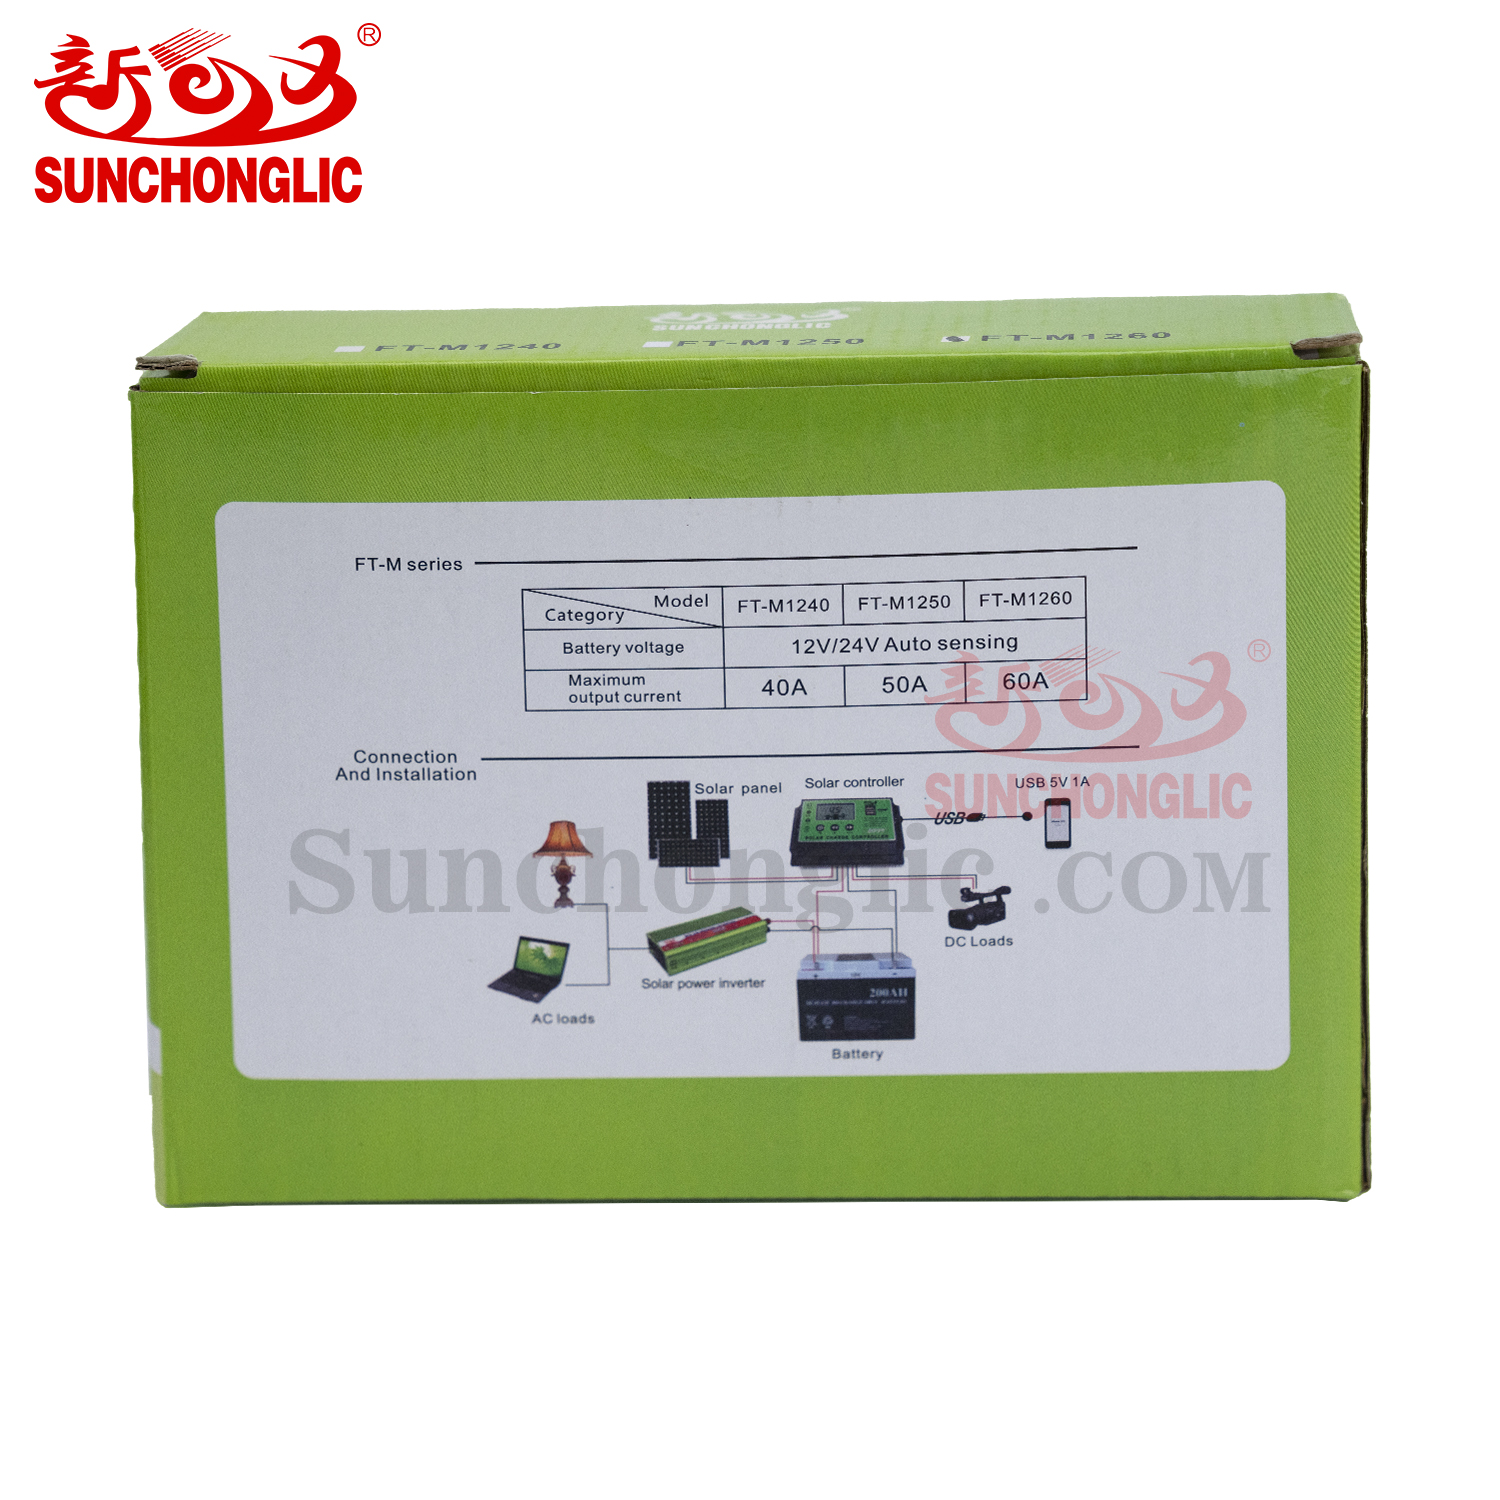 Solar Charge Controller - FT-M1260